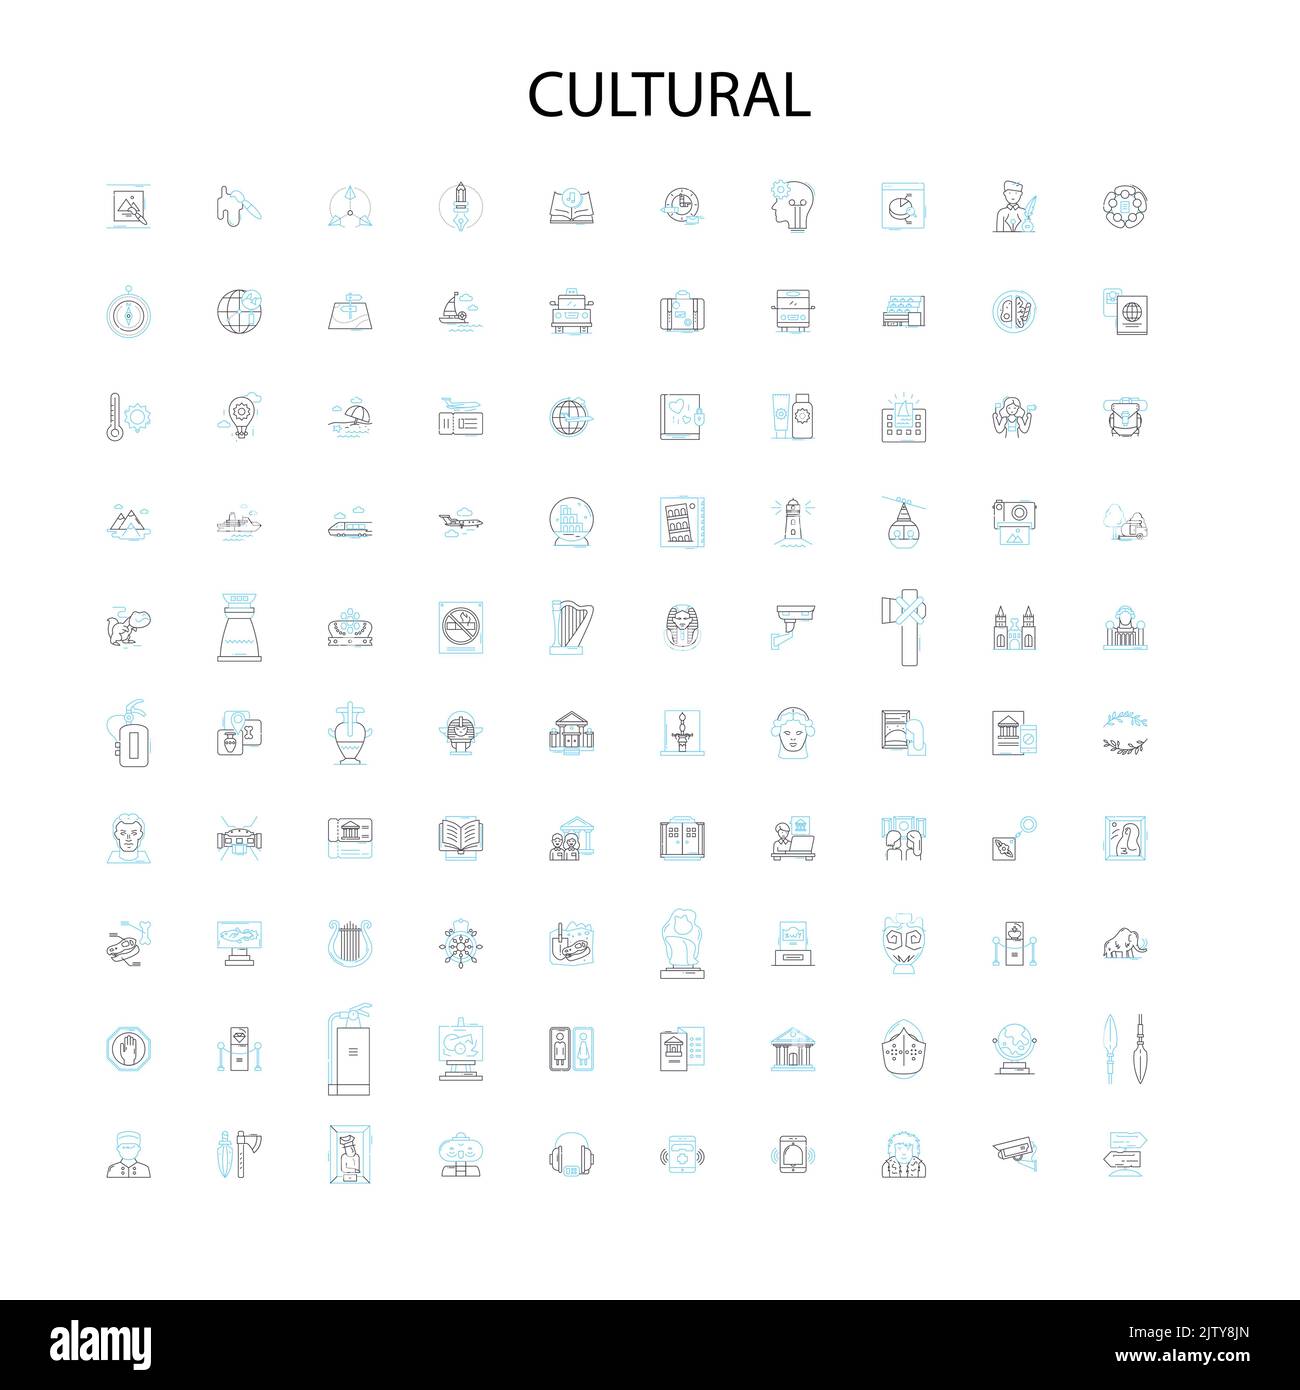 cultural icons, signs, outline symbols, concept linear illustration line collection Stock Vector